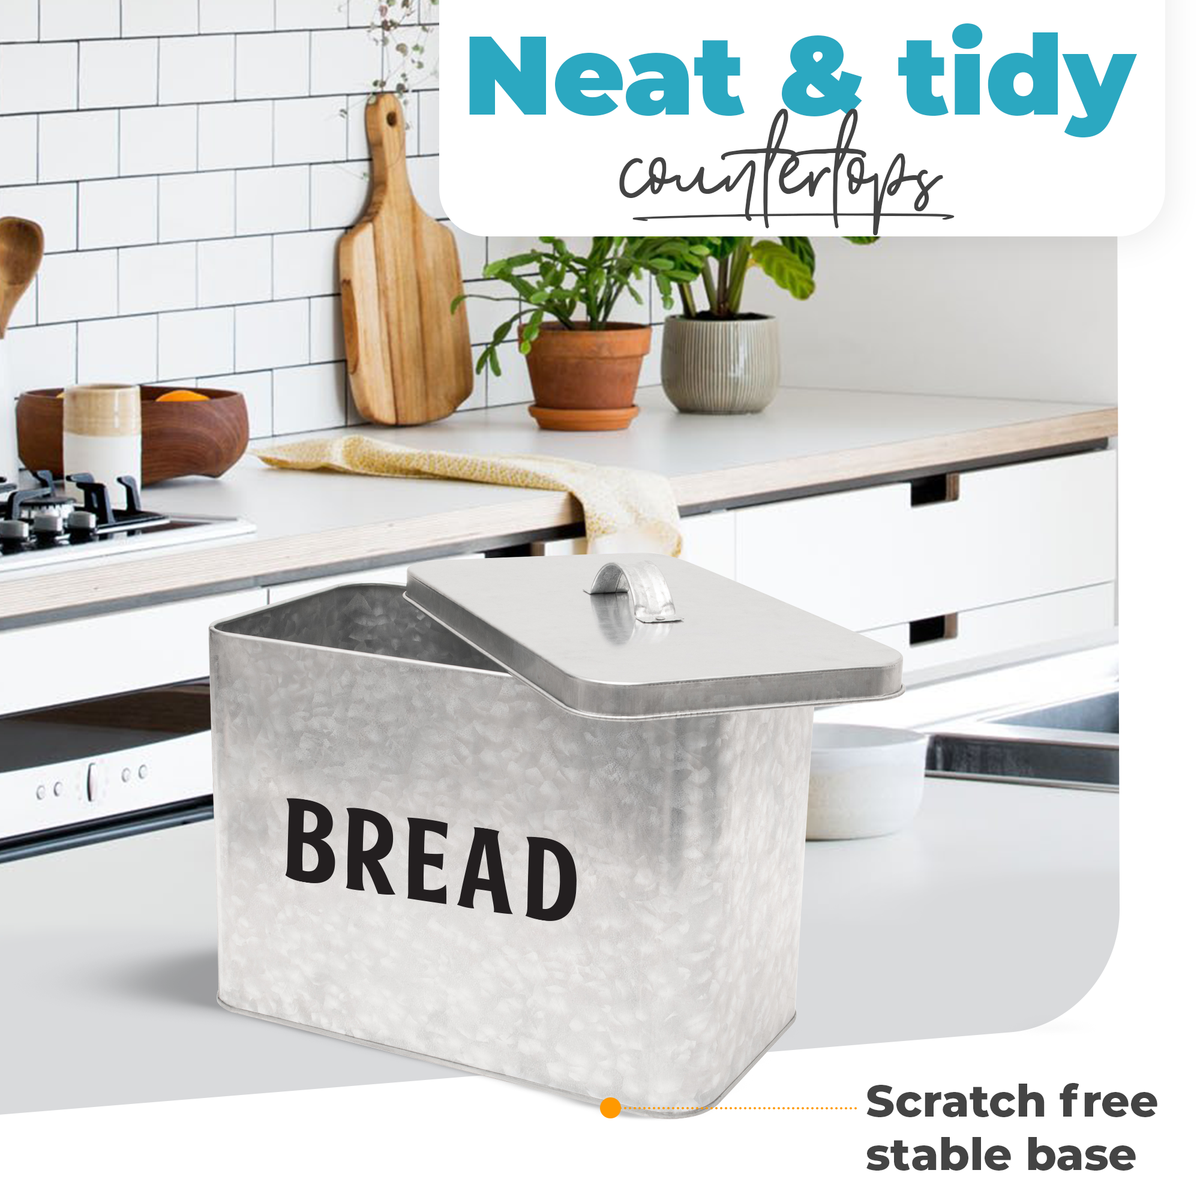 Scratch free stable base of bread box featured on gorgeous kitchen counter